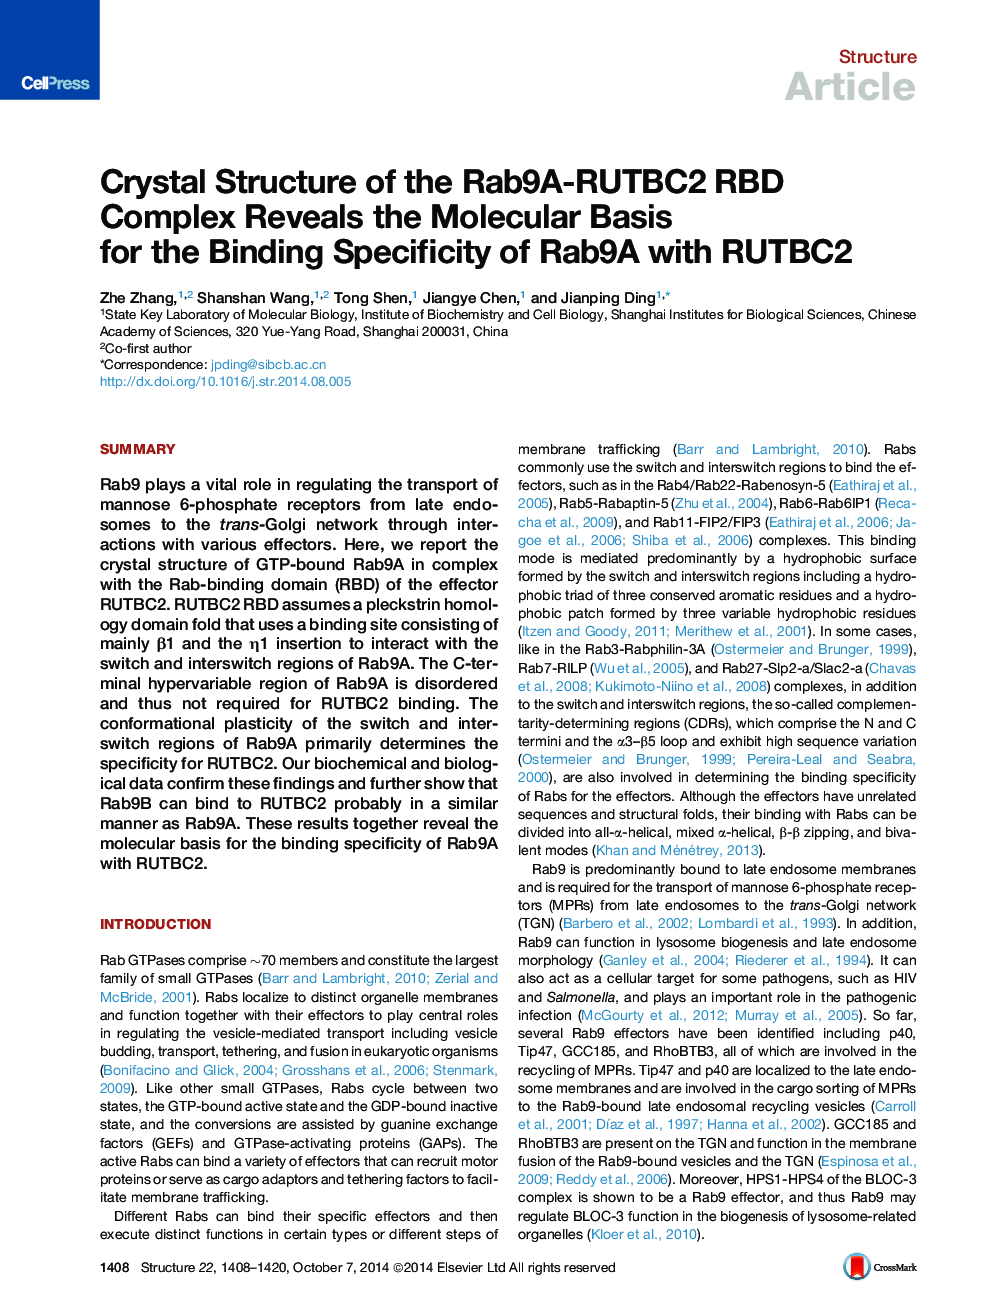 Crystal Structure of the Rab9A-RUTBC2 RBD Complex Reveals the Molecular Basis for the Binding Specificity of Rab9A with RUTBC2